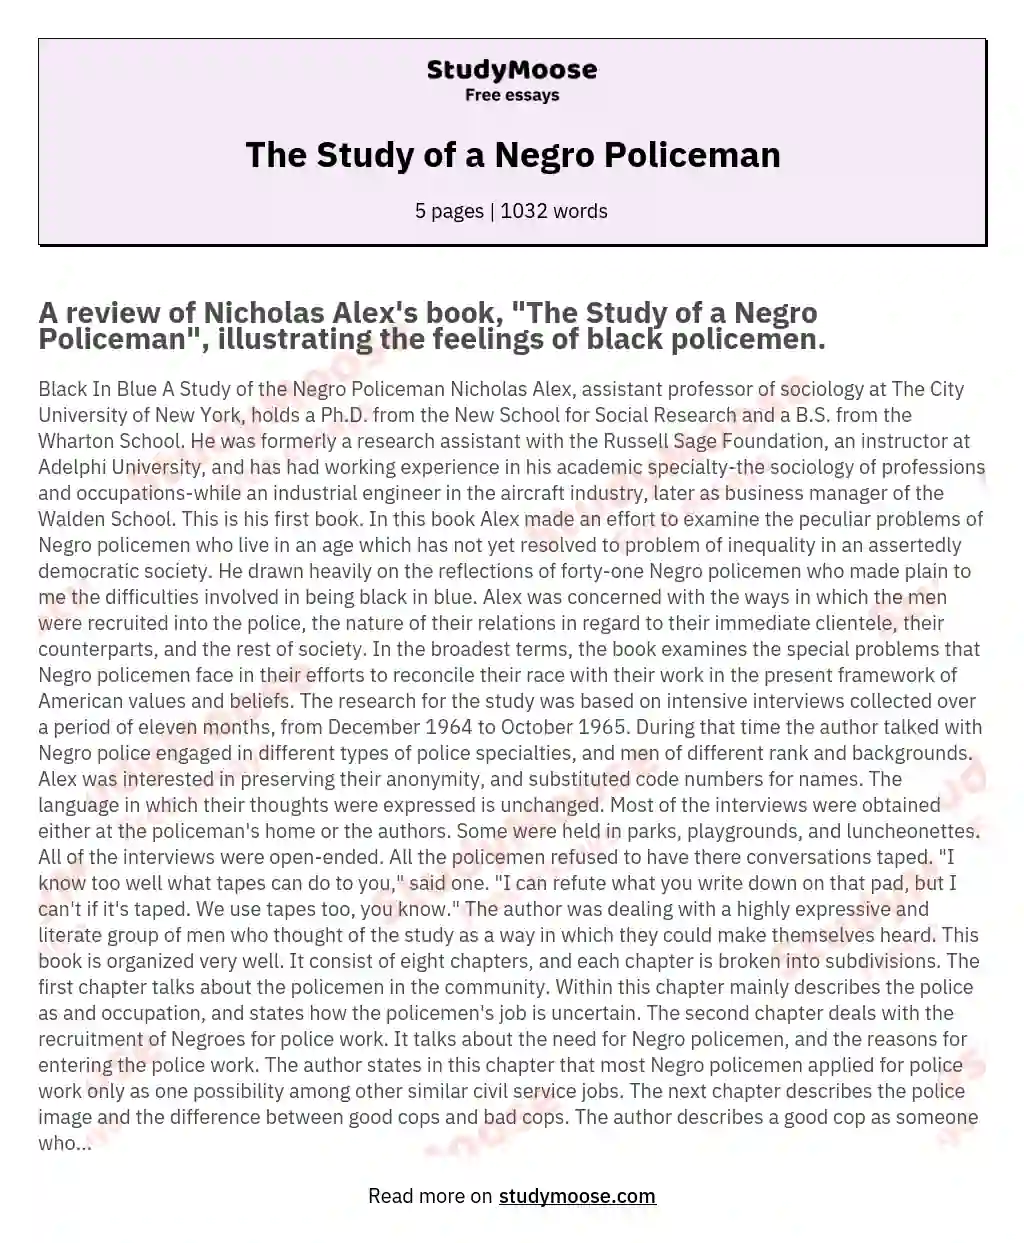 The Study of a Negro Policeman